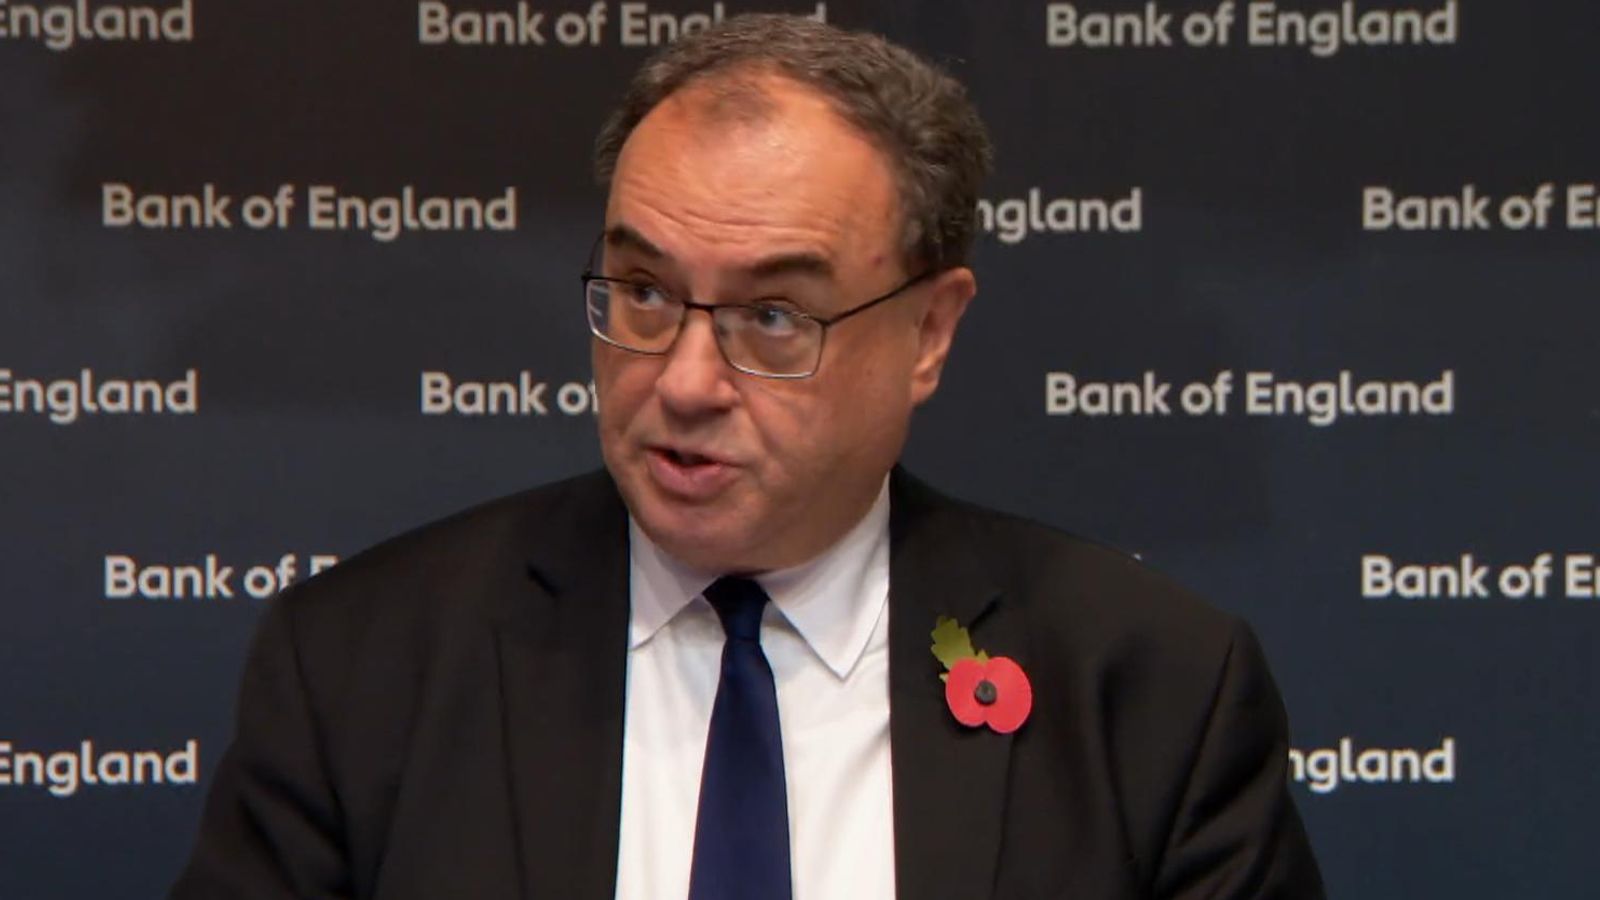 Bank of England chief says it never feels good to raise rates - but it is their job